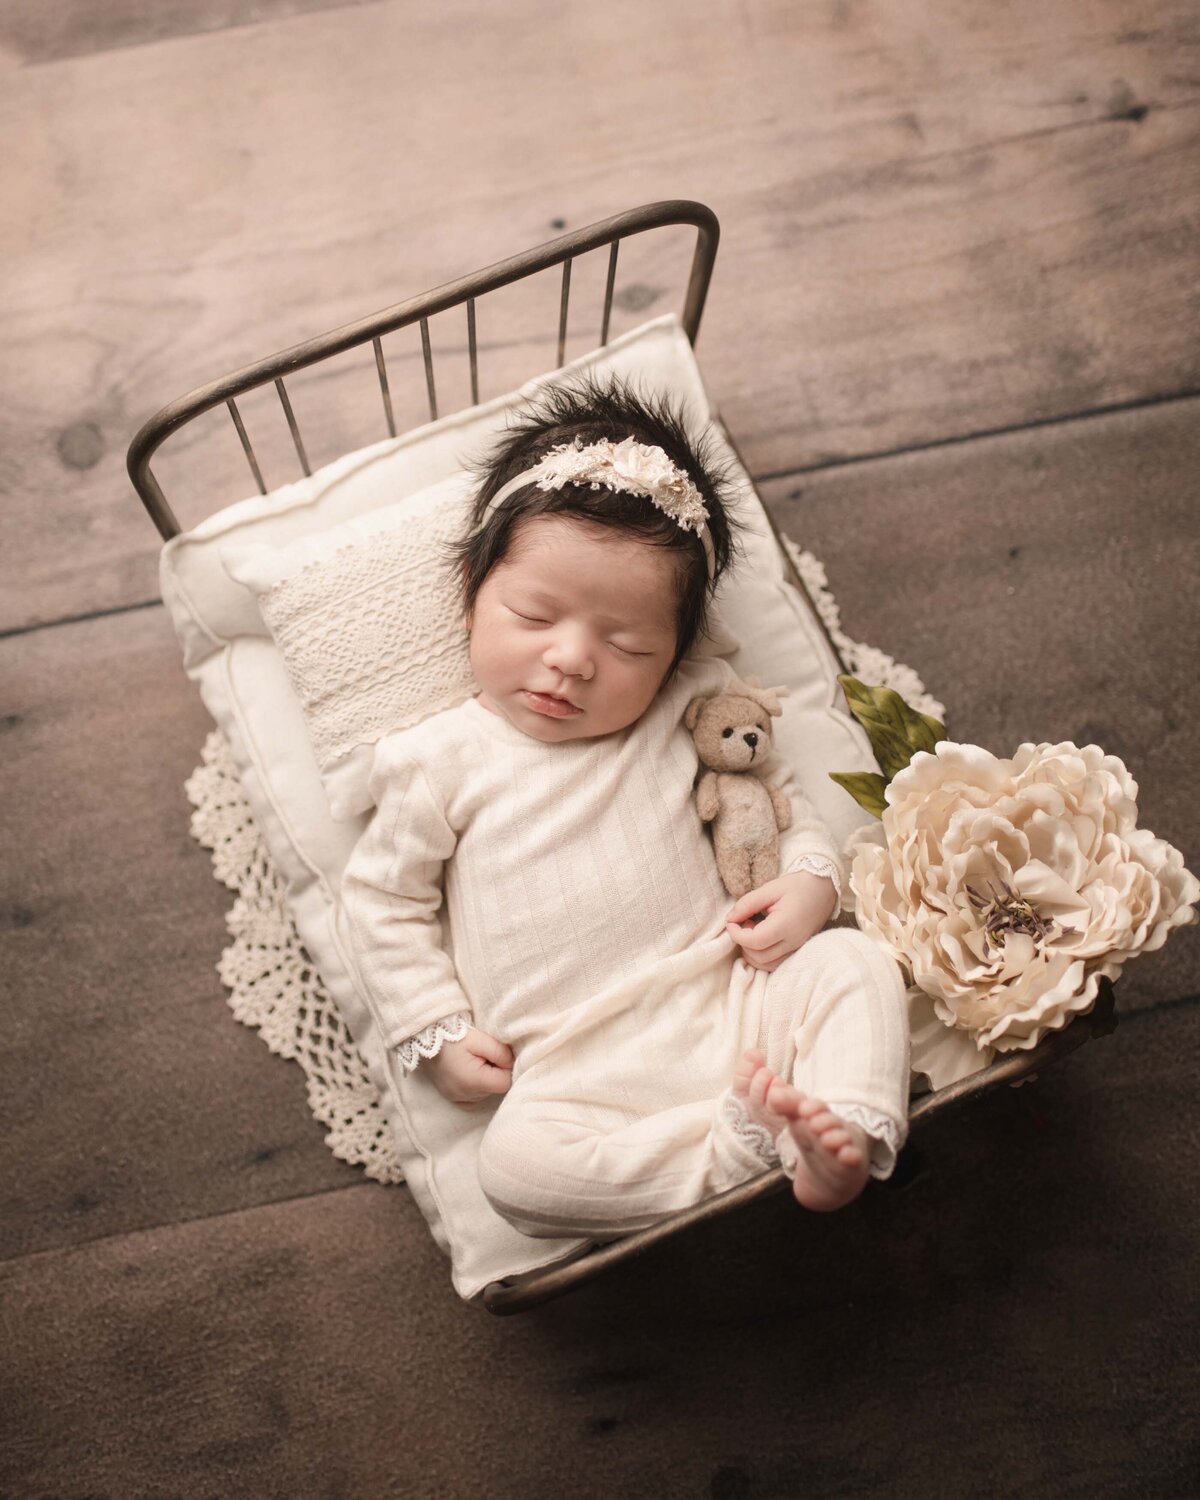 Aerial image of Lake Elsinore Newborn Baby Photoshoot. Baby girl is posed in a cream knit romper and posed on a miniature newborn metal posing prop bed. Baby is wearing a delicate floral headband and she has a tiny felt teddy bear tucked under her arm. Captured by best Lake Elsinore newborn photographer Bonny Lynn Photography